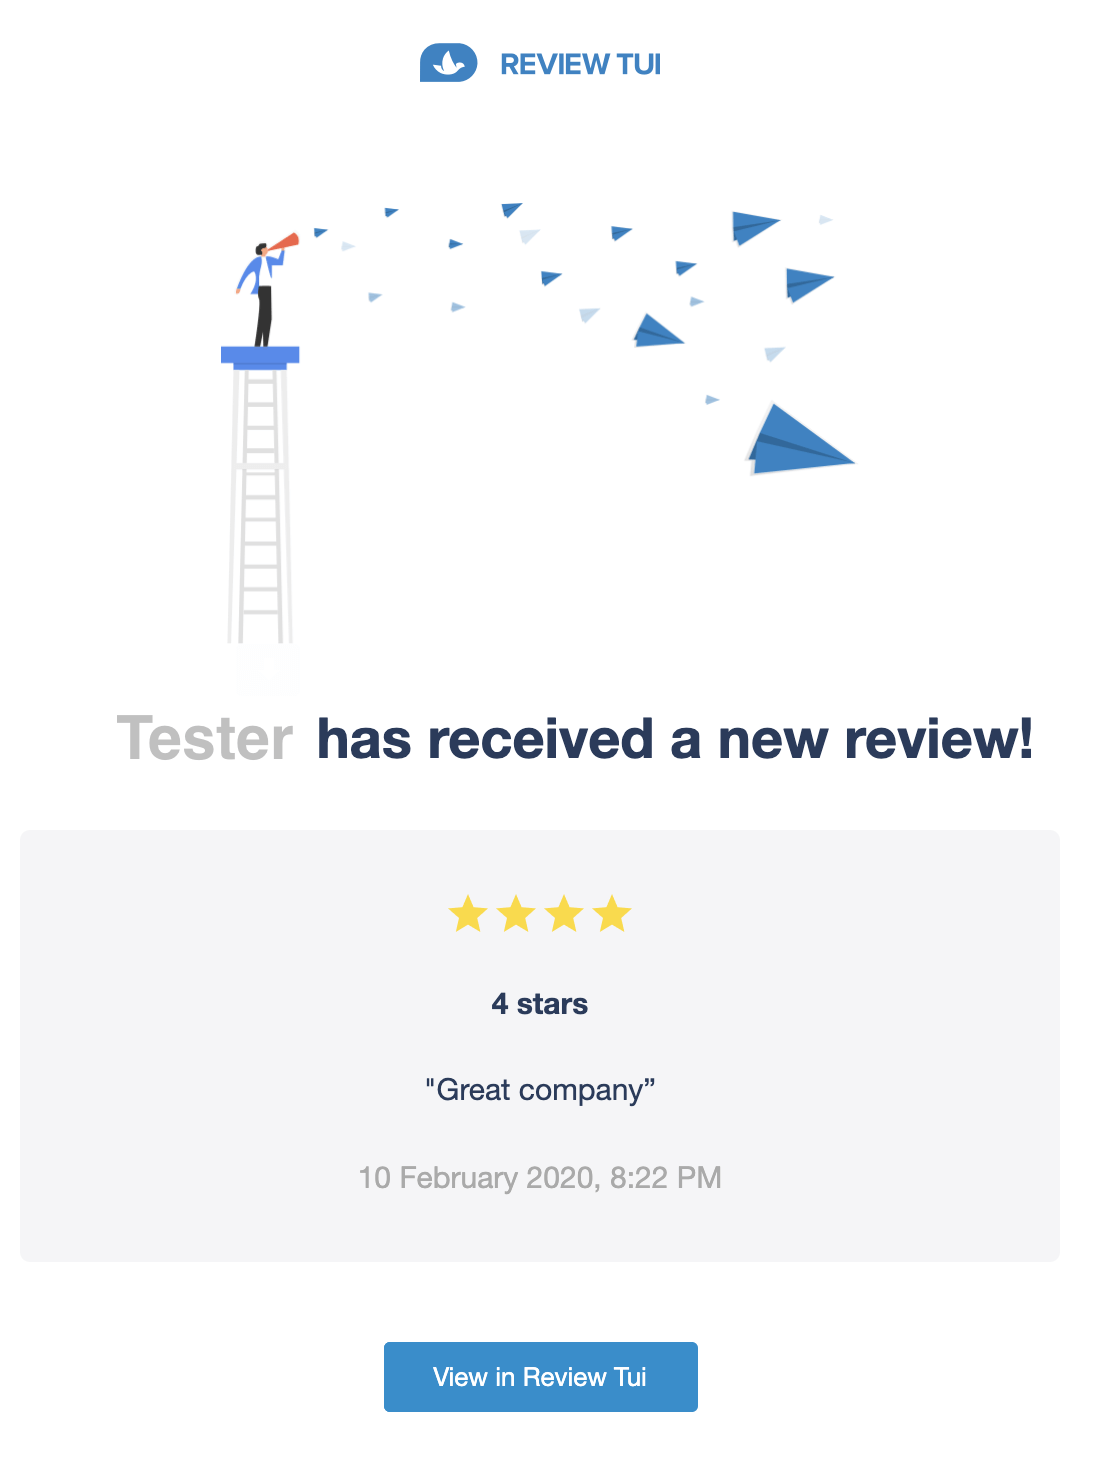 Getting customer feedback and reviews has never been easier with Review Tui